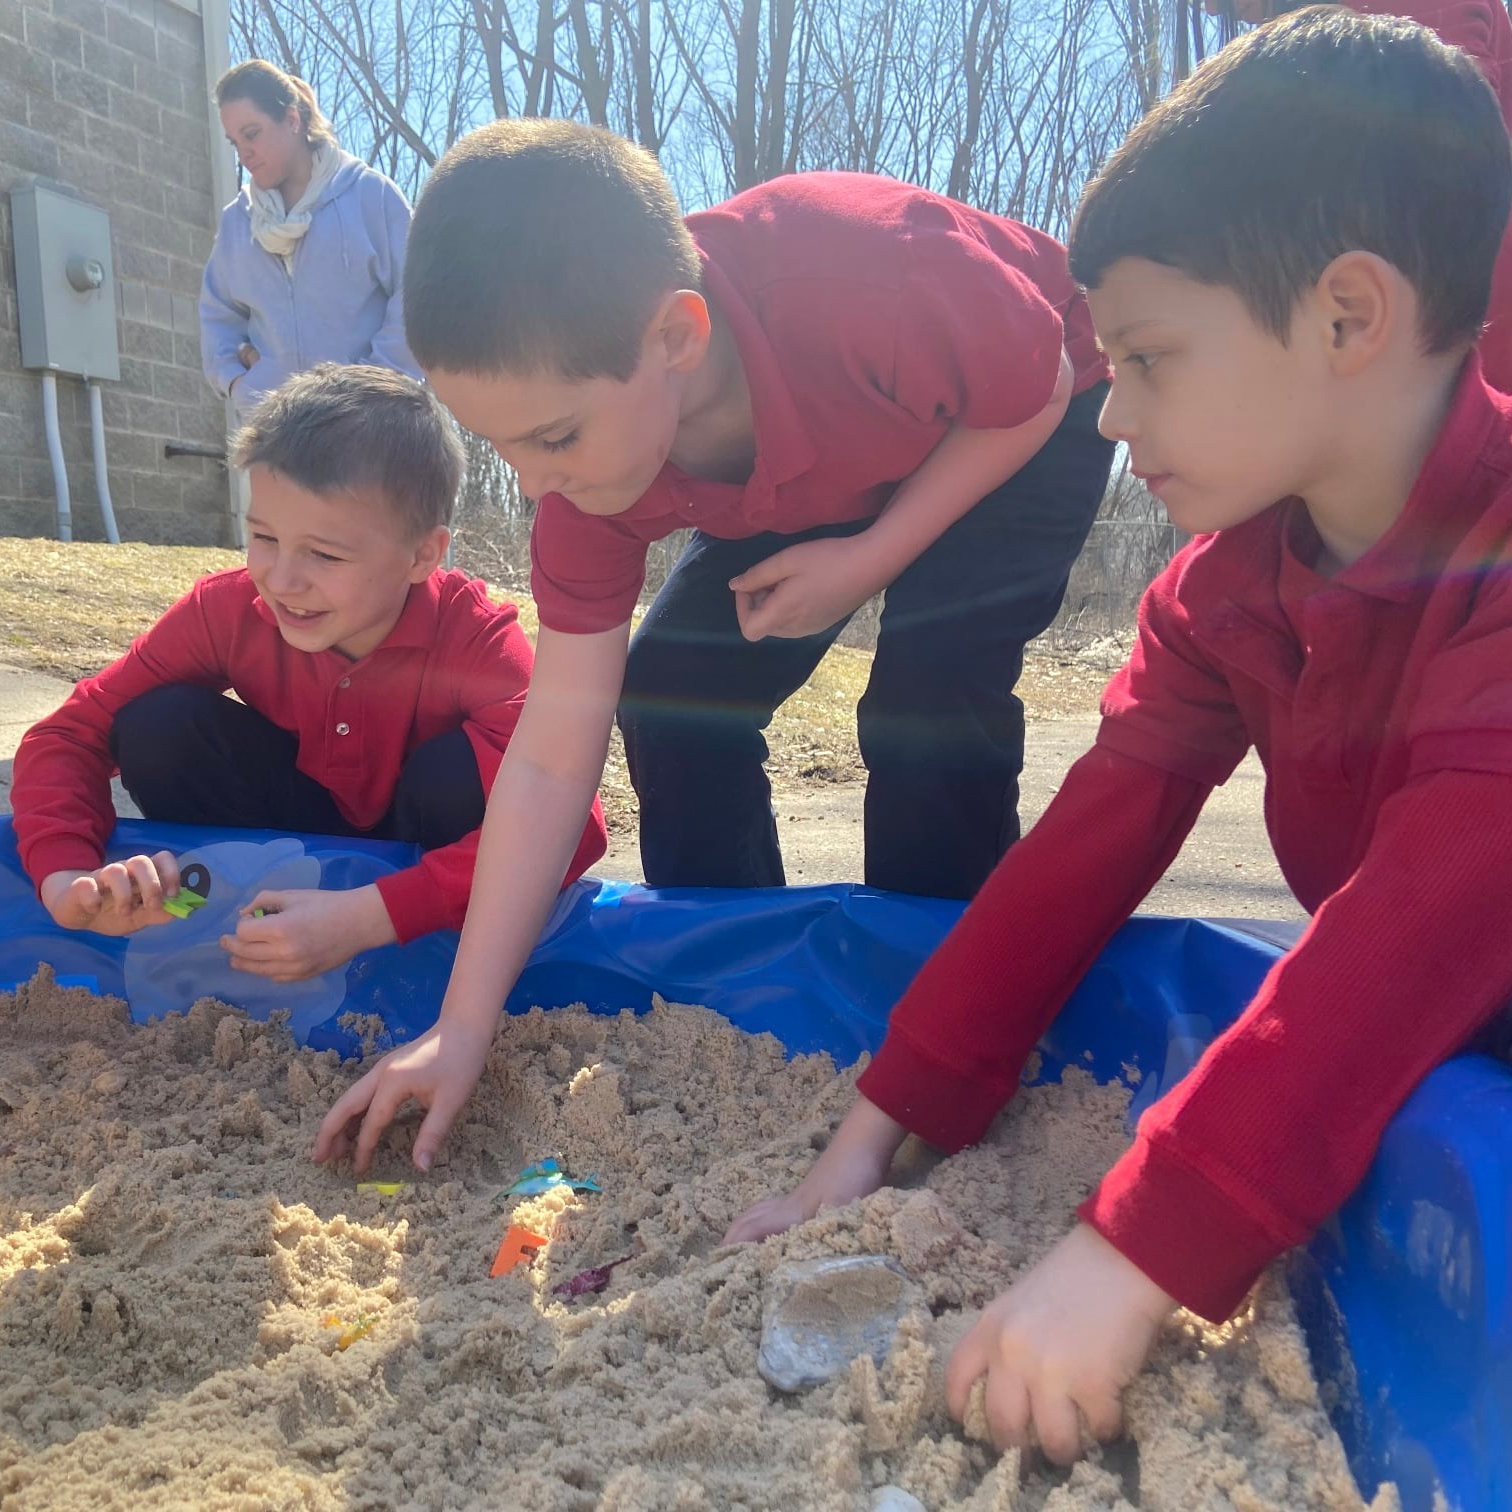 students play in sandbox on playground together